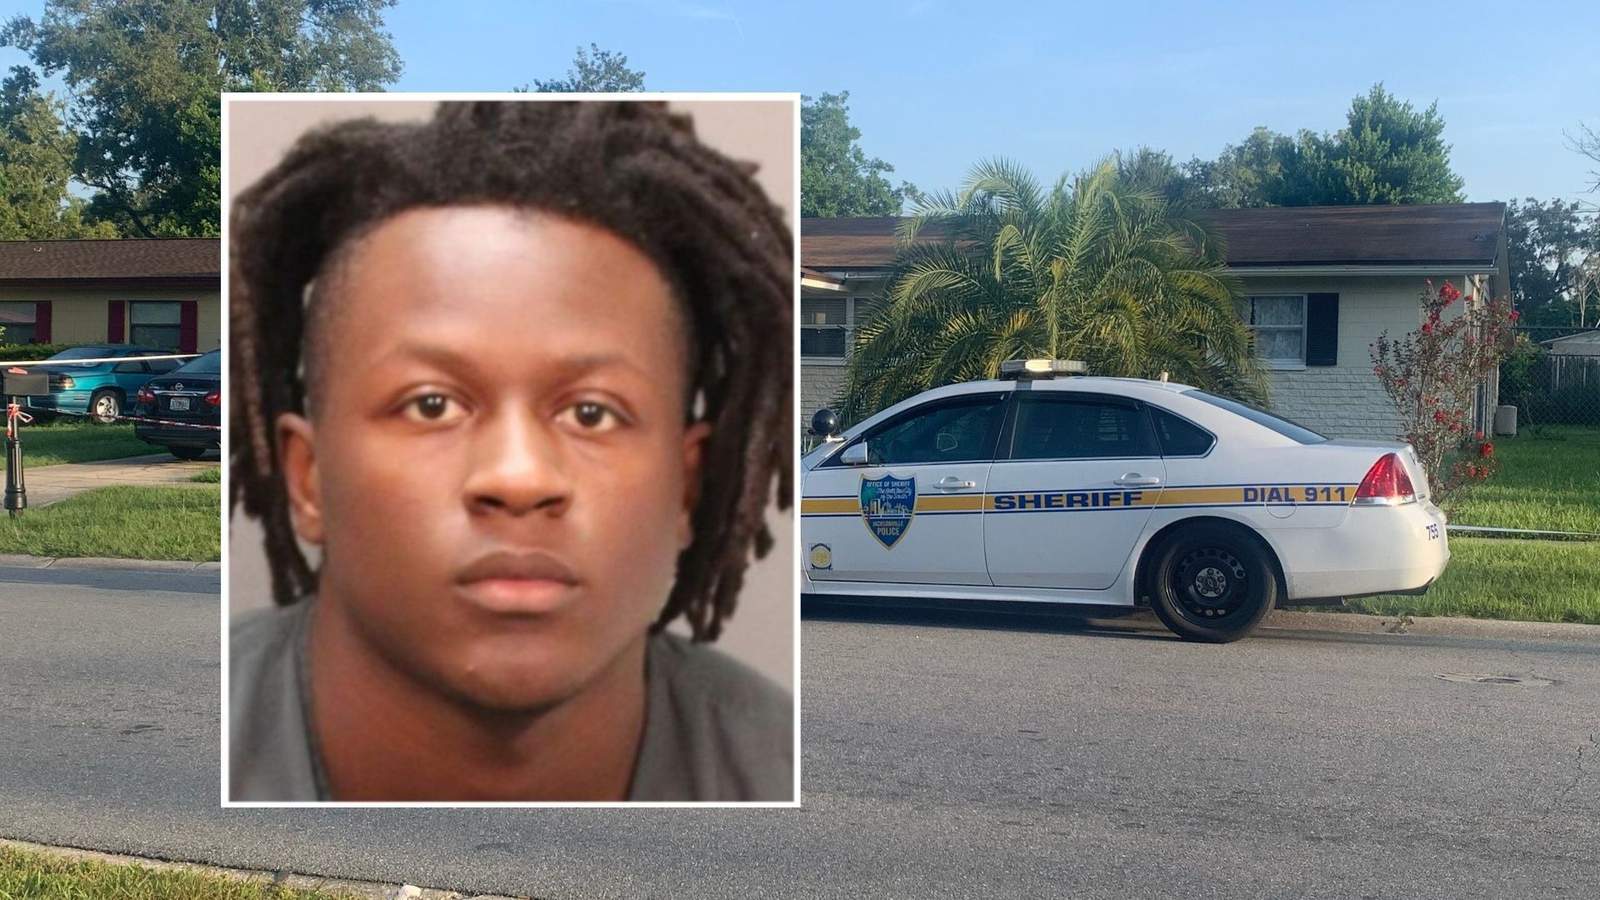 Man, 20, arrested in shooting death of girlfriend’s 14-year-old sister